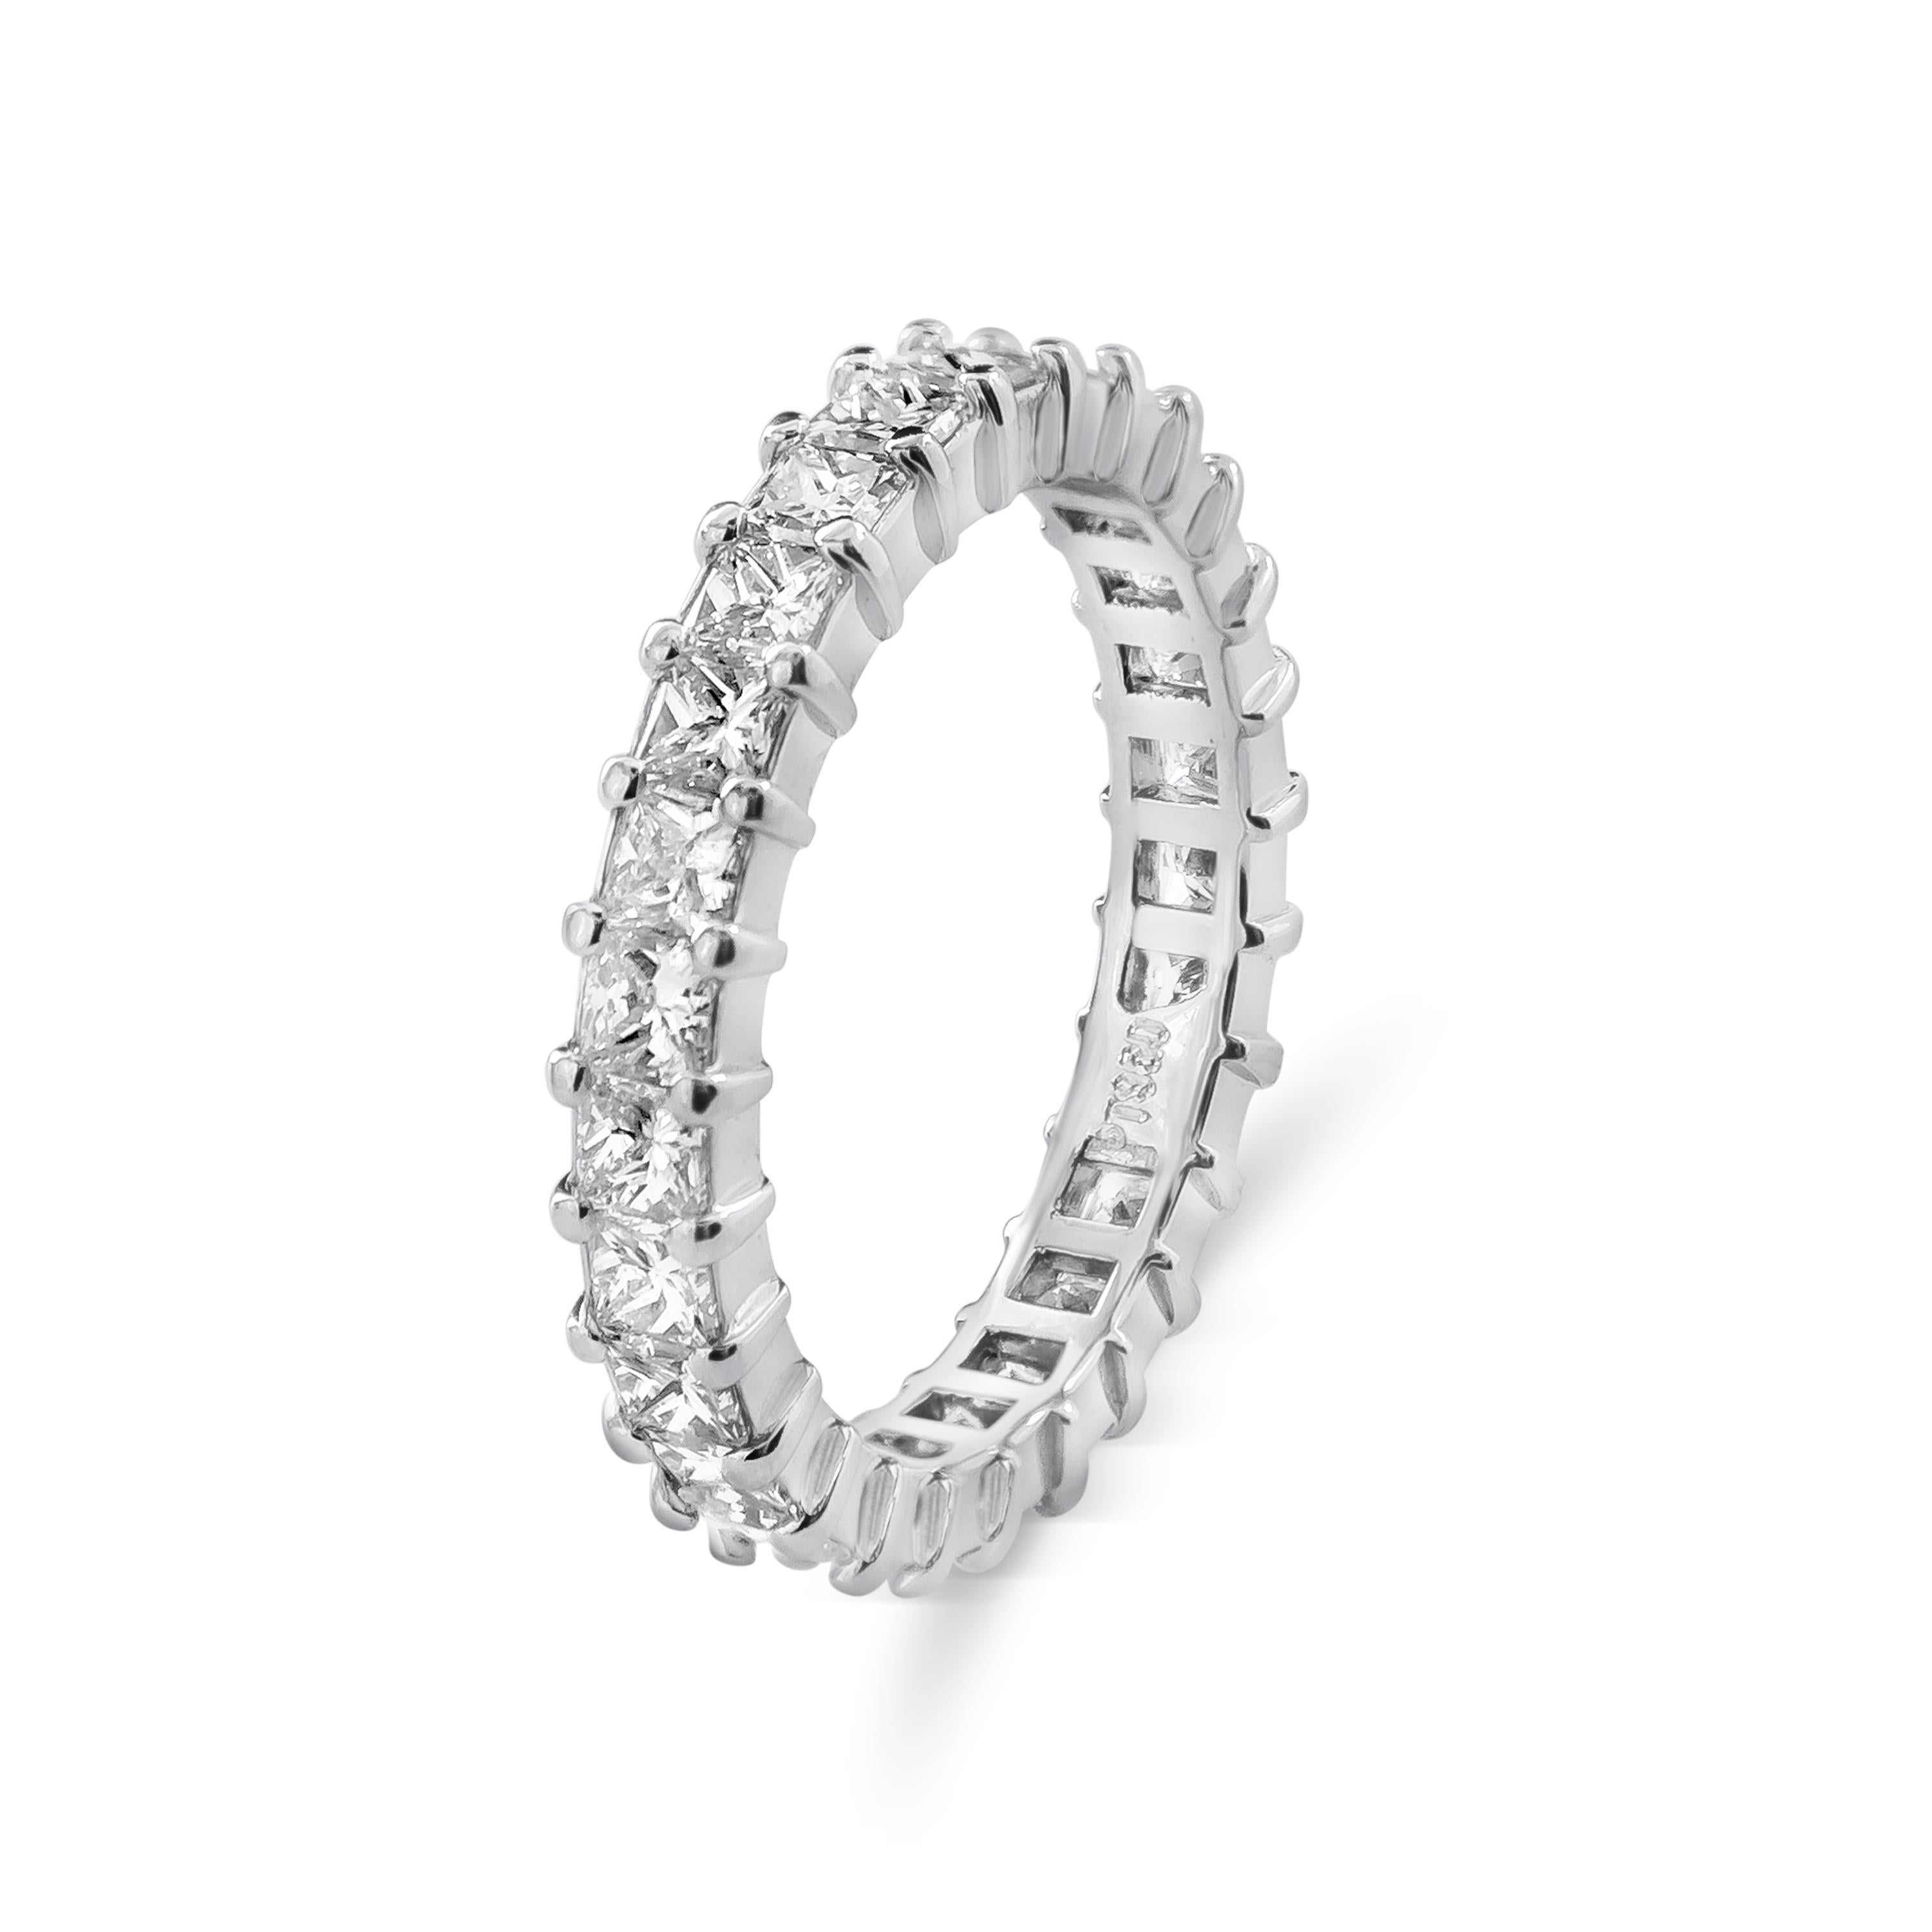 A magnificent eternity wedding band showcasing brilliant princess cut diamonds aligned in a basket prong setting. Diamonds weigh 2.30 carats total, F Color and VS in Clarity. Made with Platinum. Size 6.5 US resizable upon request.

Style available